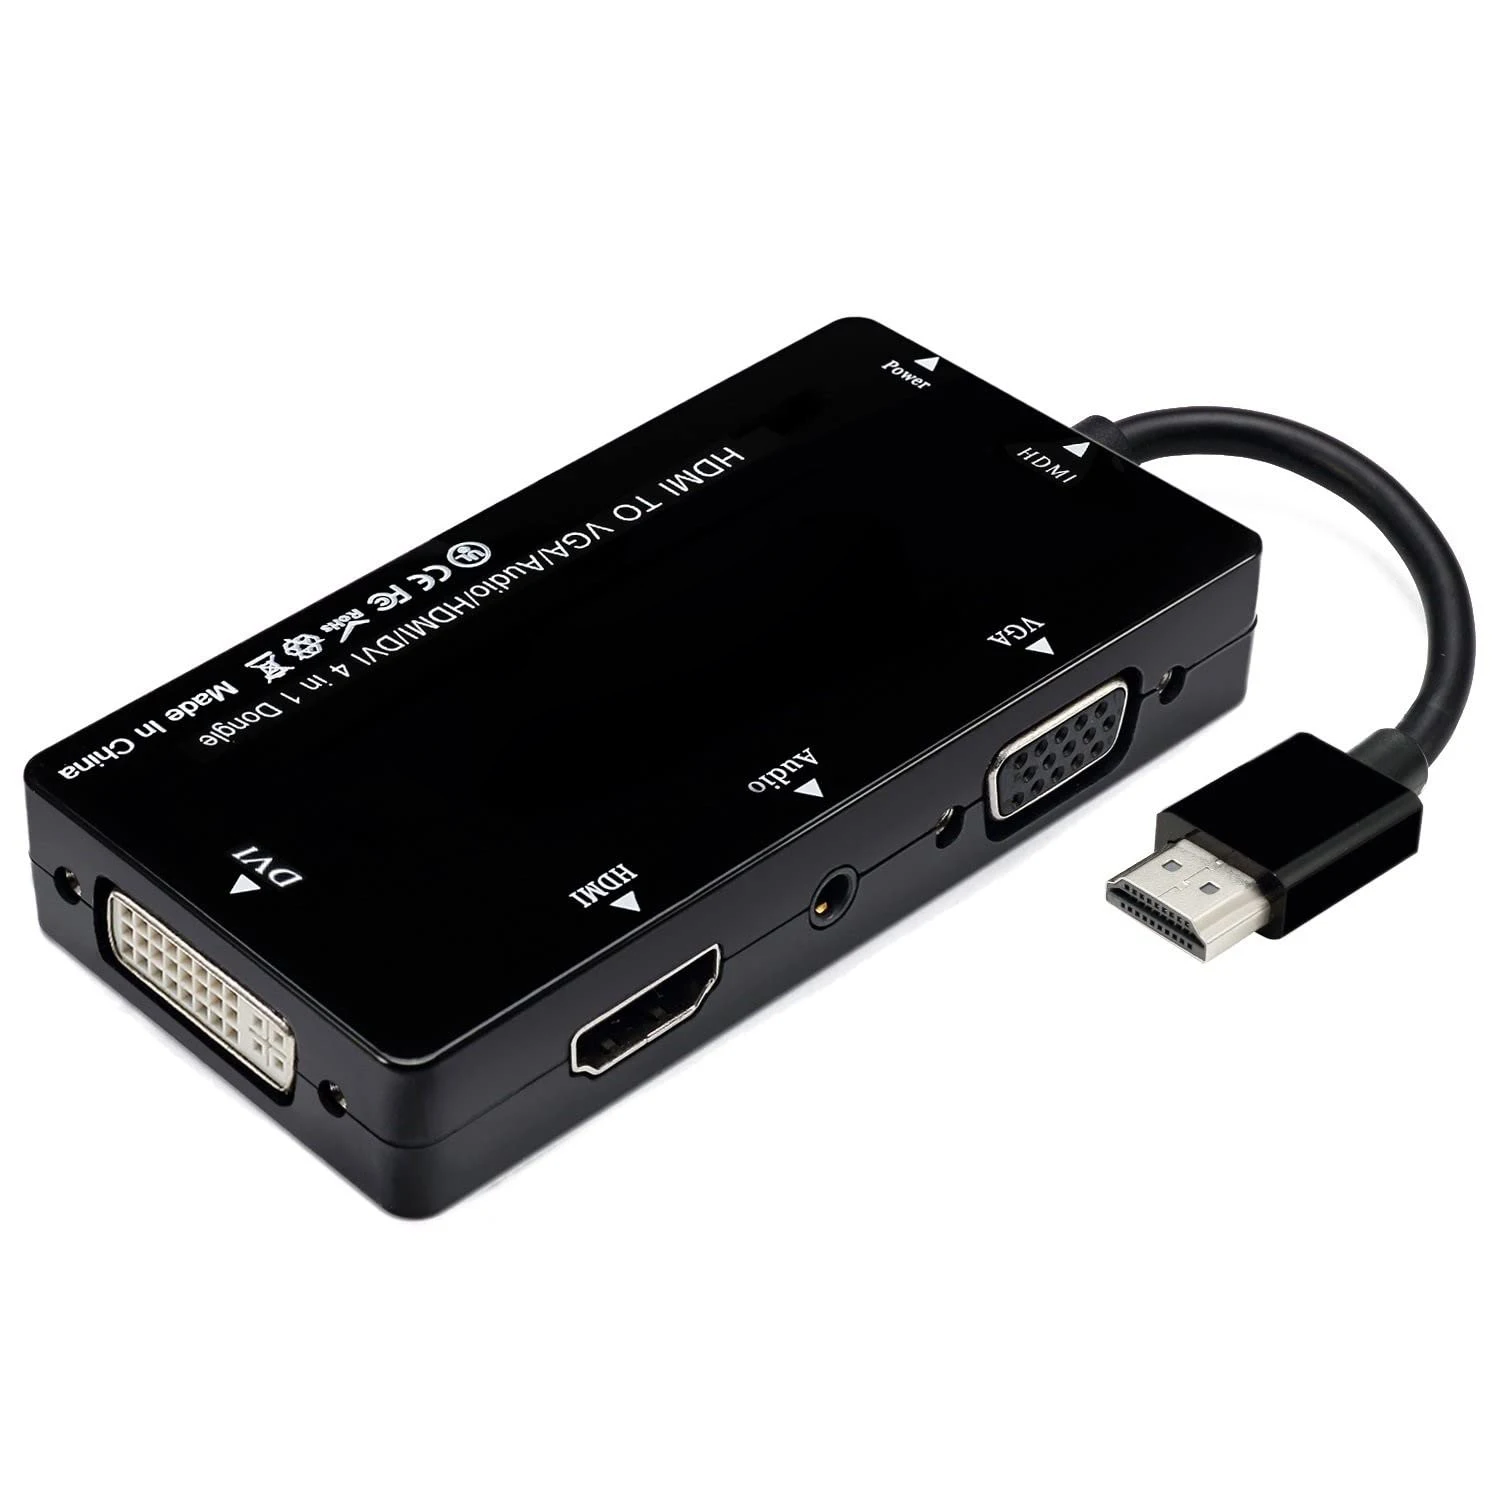 

HDMI to VGA DVI HDMI Converter Adapter Cable for HDMI Laptops Computers etc Connecting Simultaneously